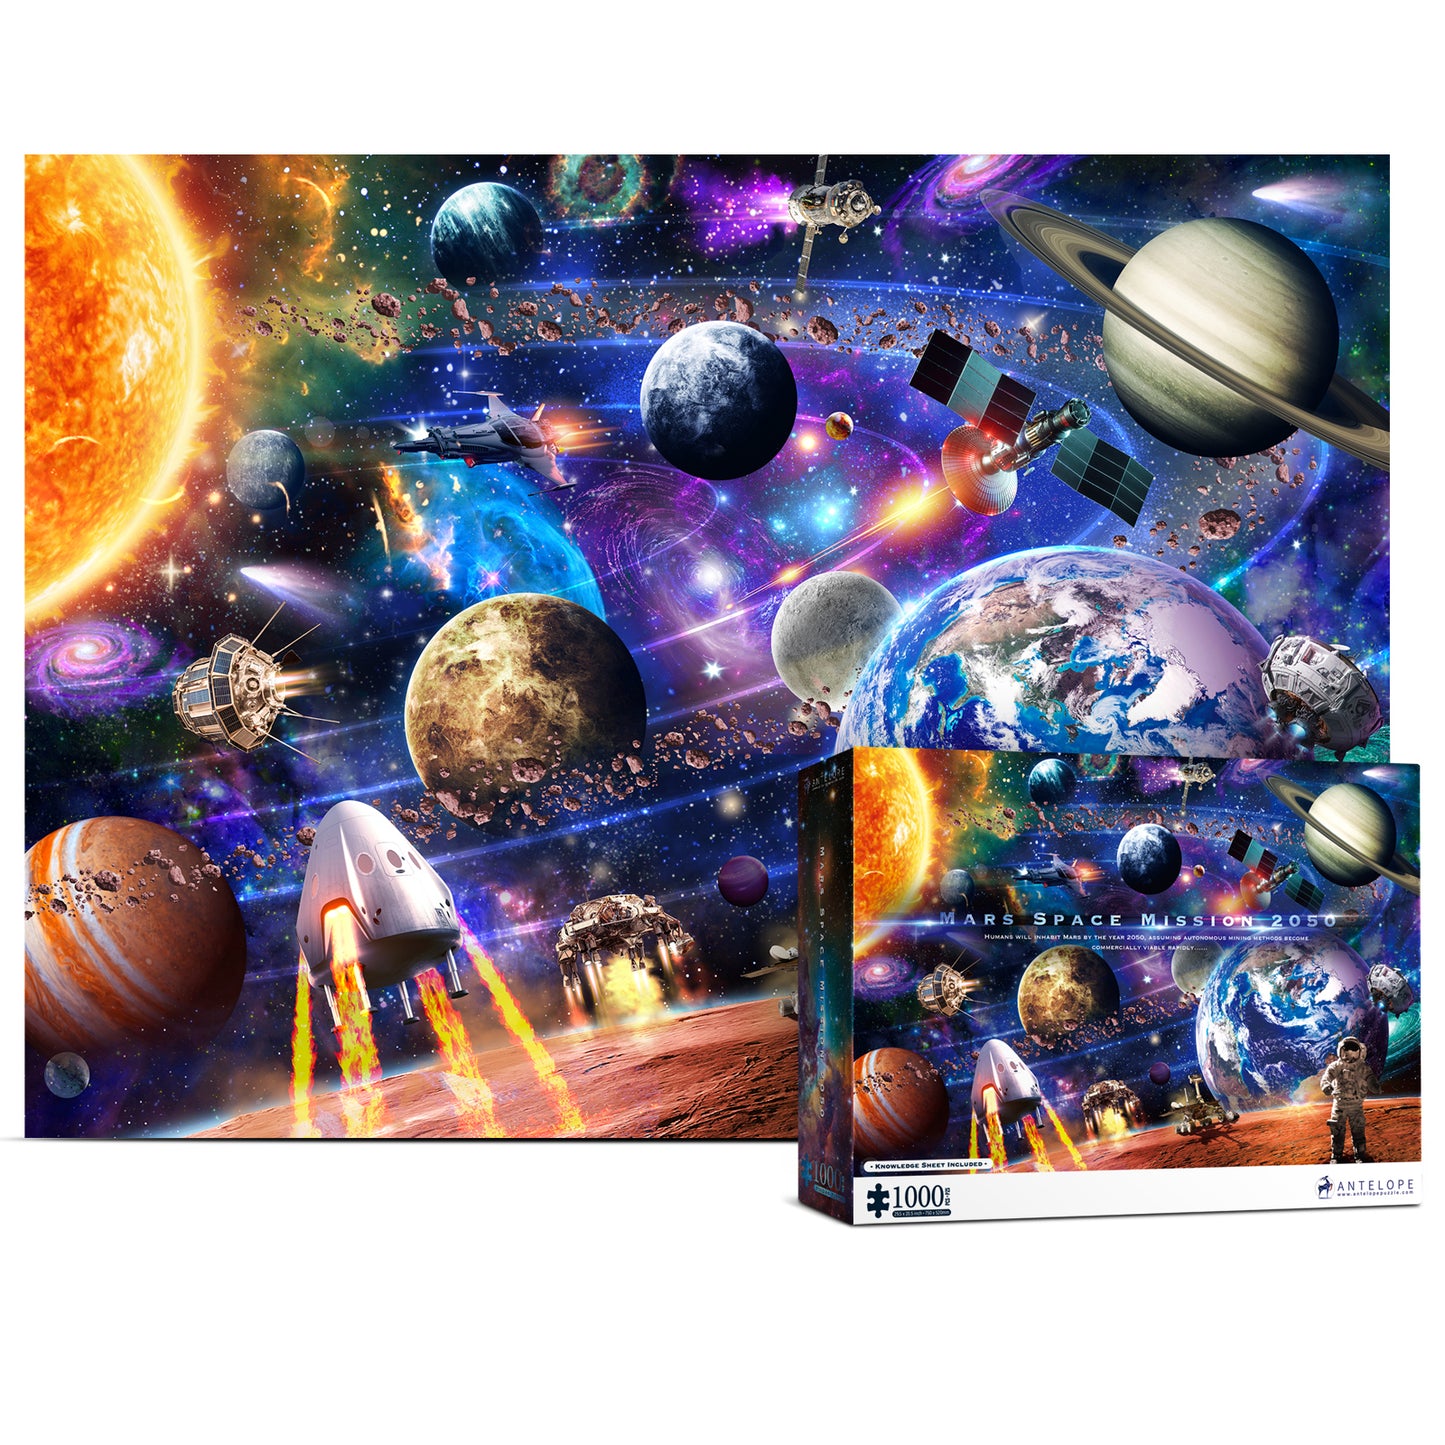 Antelope Mars Space Mission 2050 Jigsaw Puzzle - The Universe